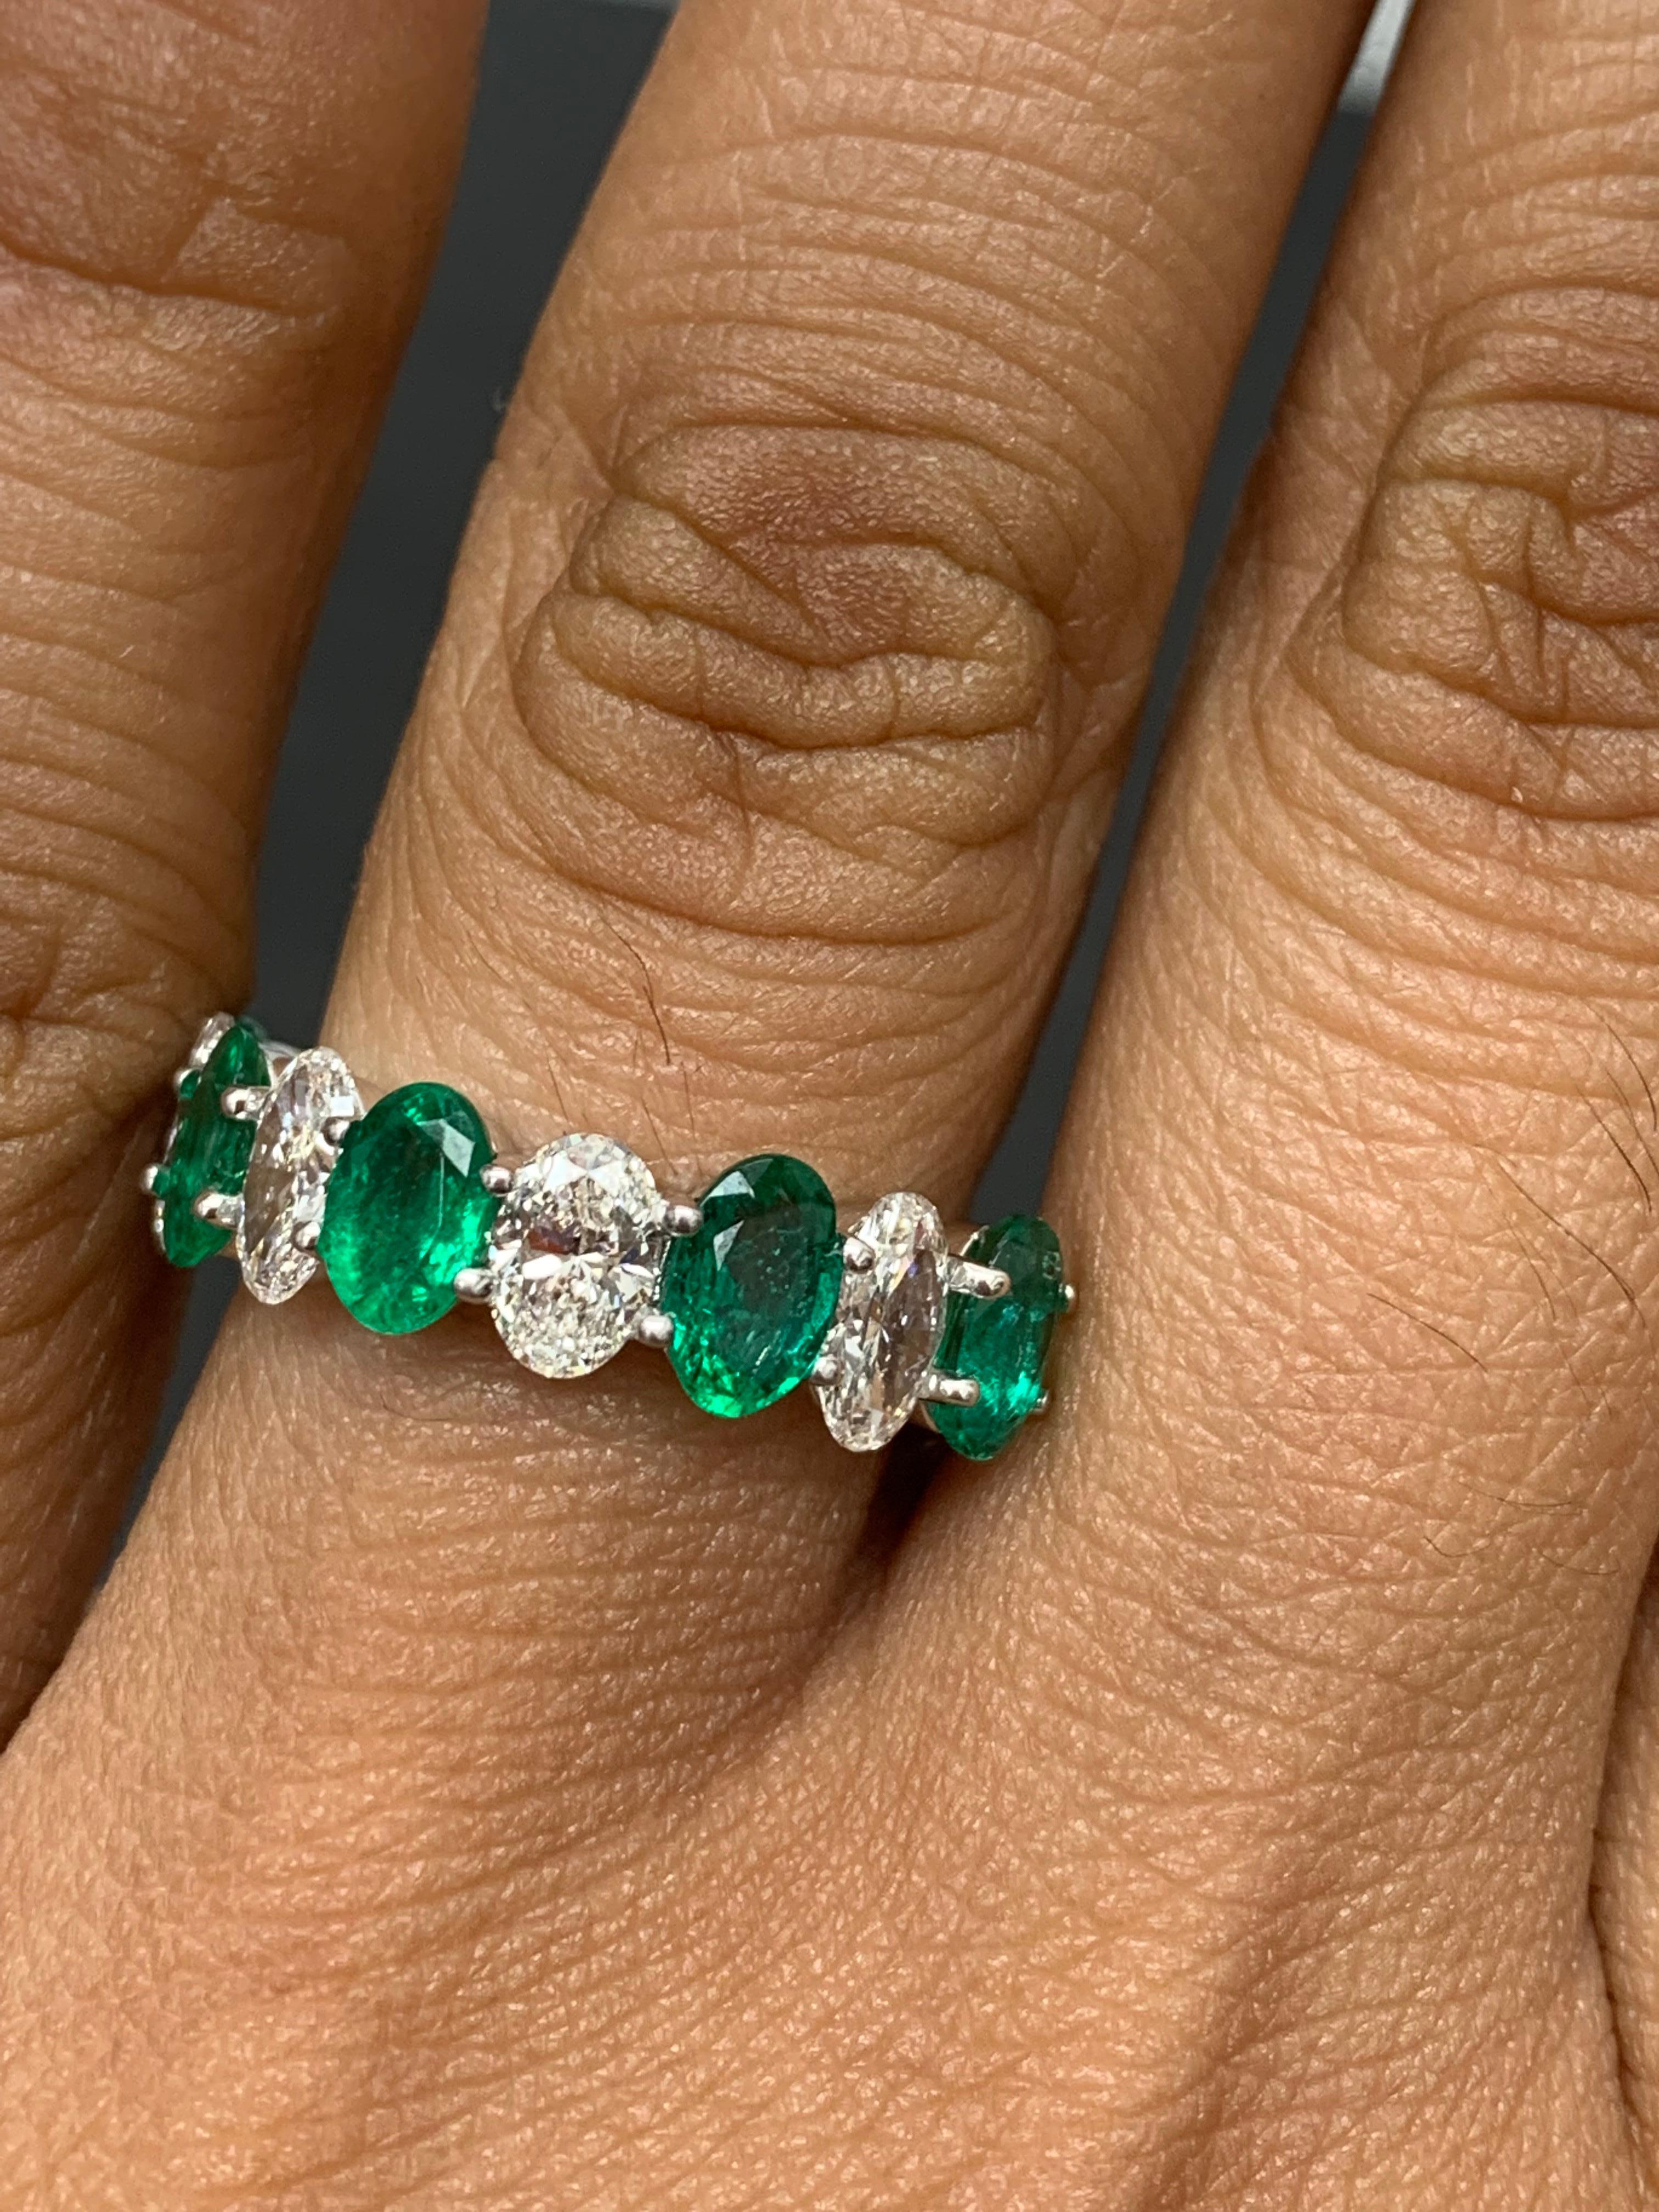 A fascinating gemstone wedding band 9 stone style showcasing lush green 5 oval cut emeralds weighing 1.89 carats total, alternating to these emeralds are 4 oval cut brilliant colorless diamonds weighing 1.26 carats, Made in 14K White Gold, Size 6.5